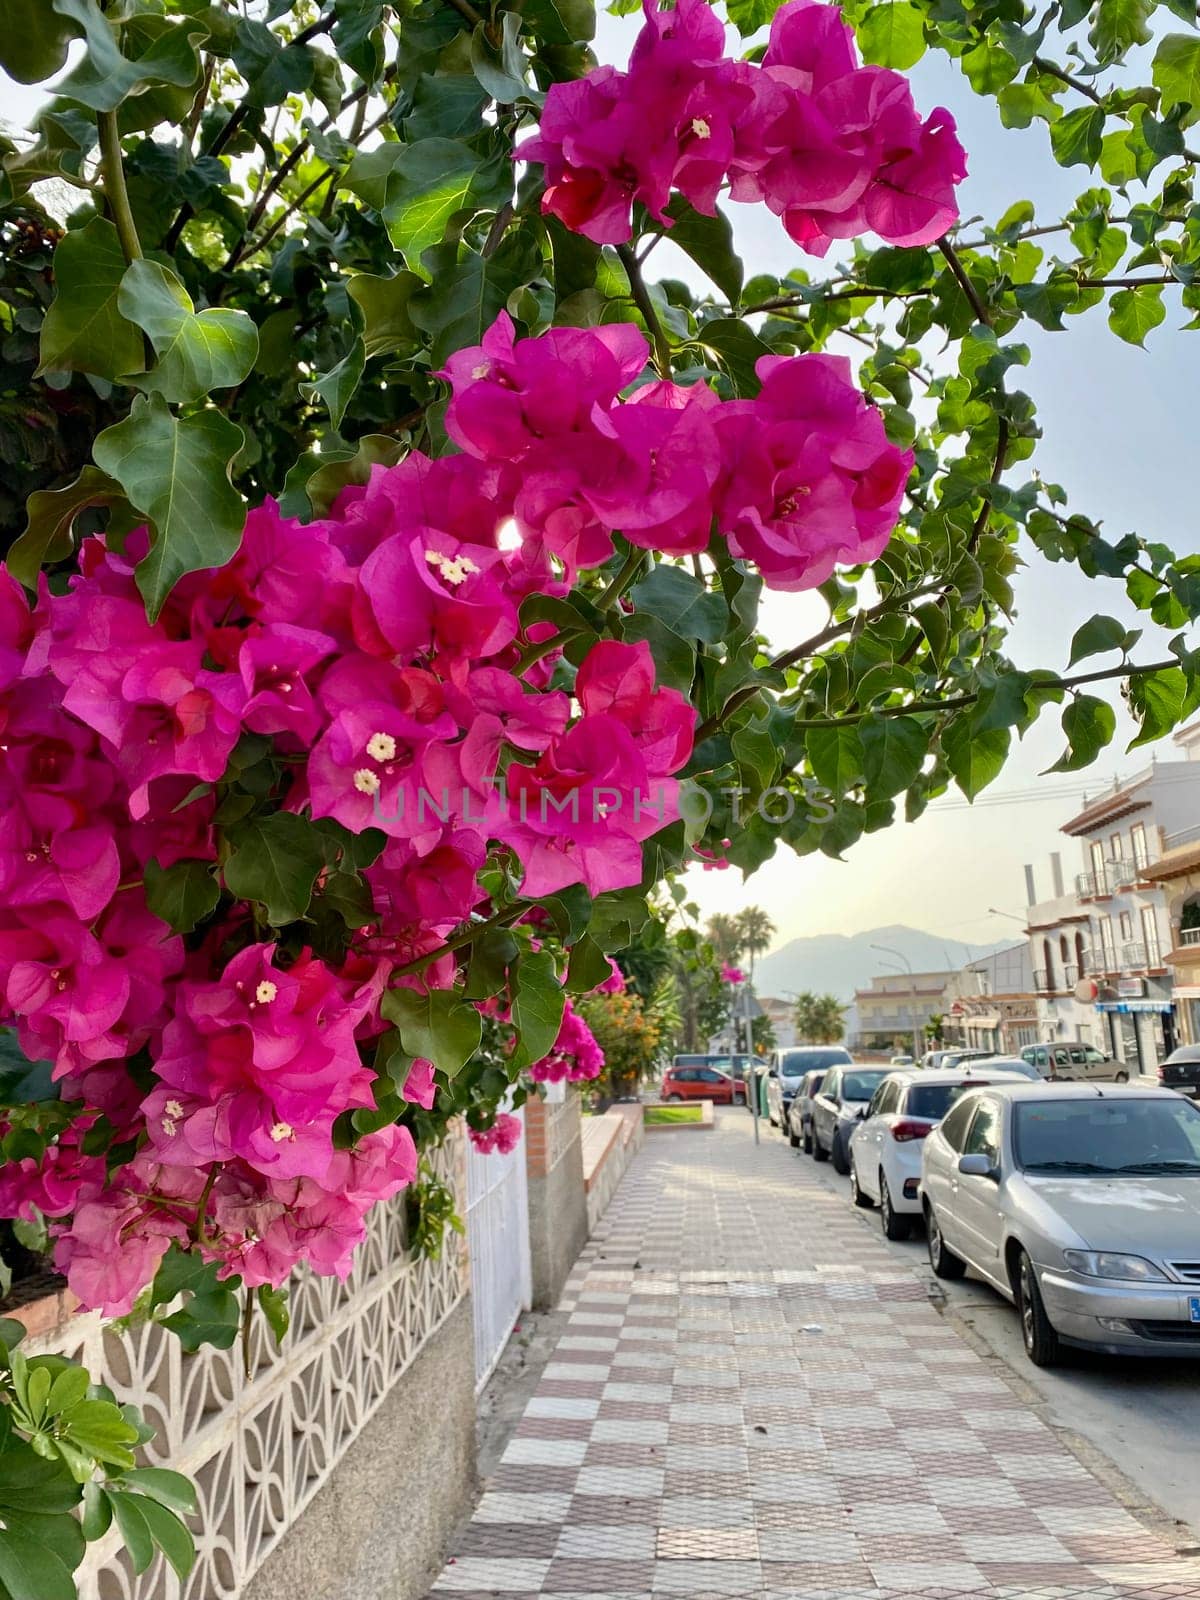 Blooming bougainvillea street town sidewall, traditional Greek flowers, pink floral wall . High quality photo